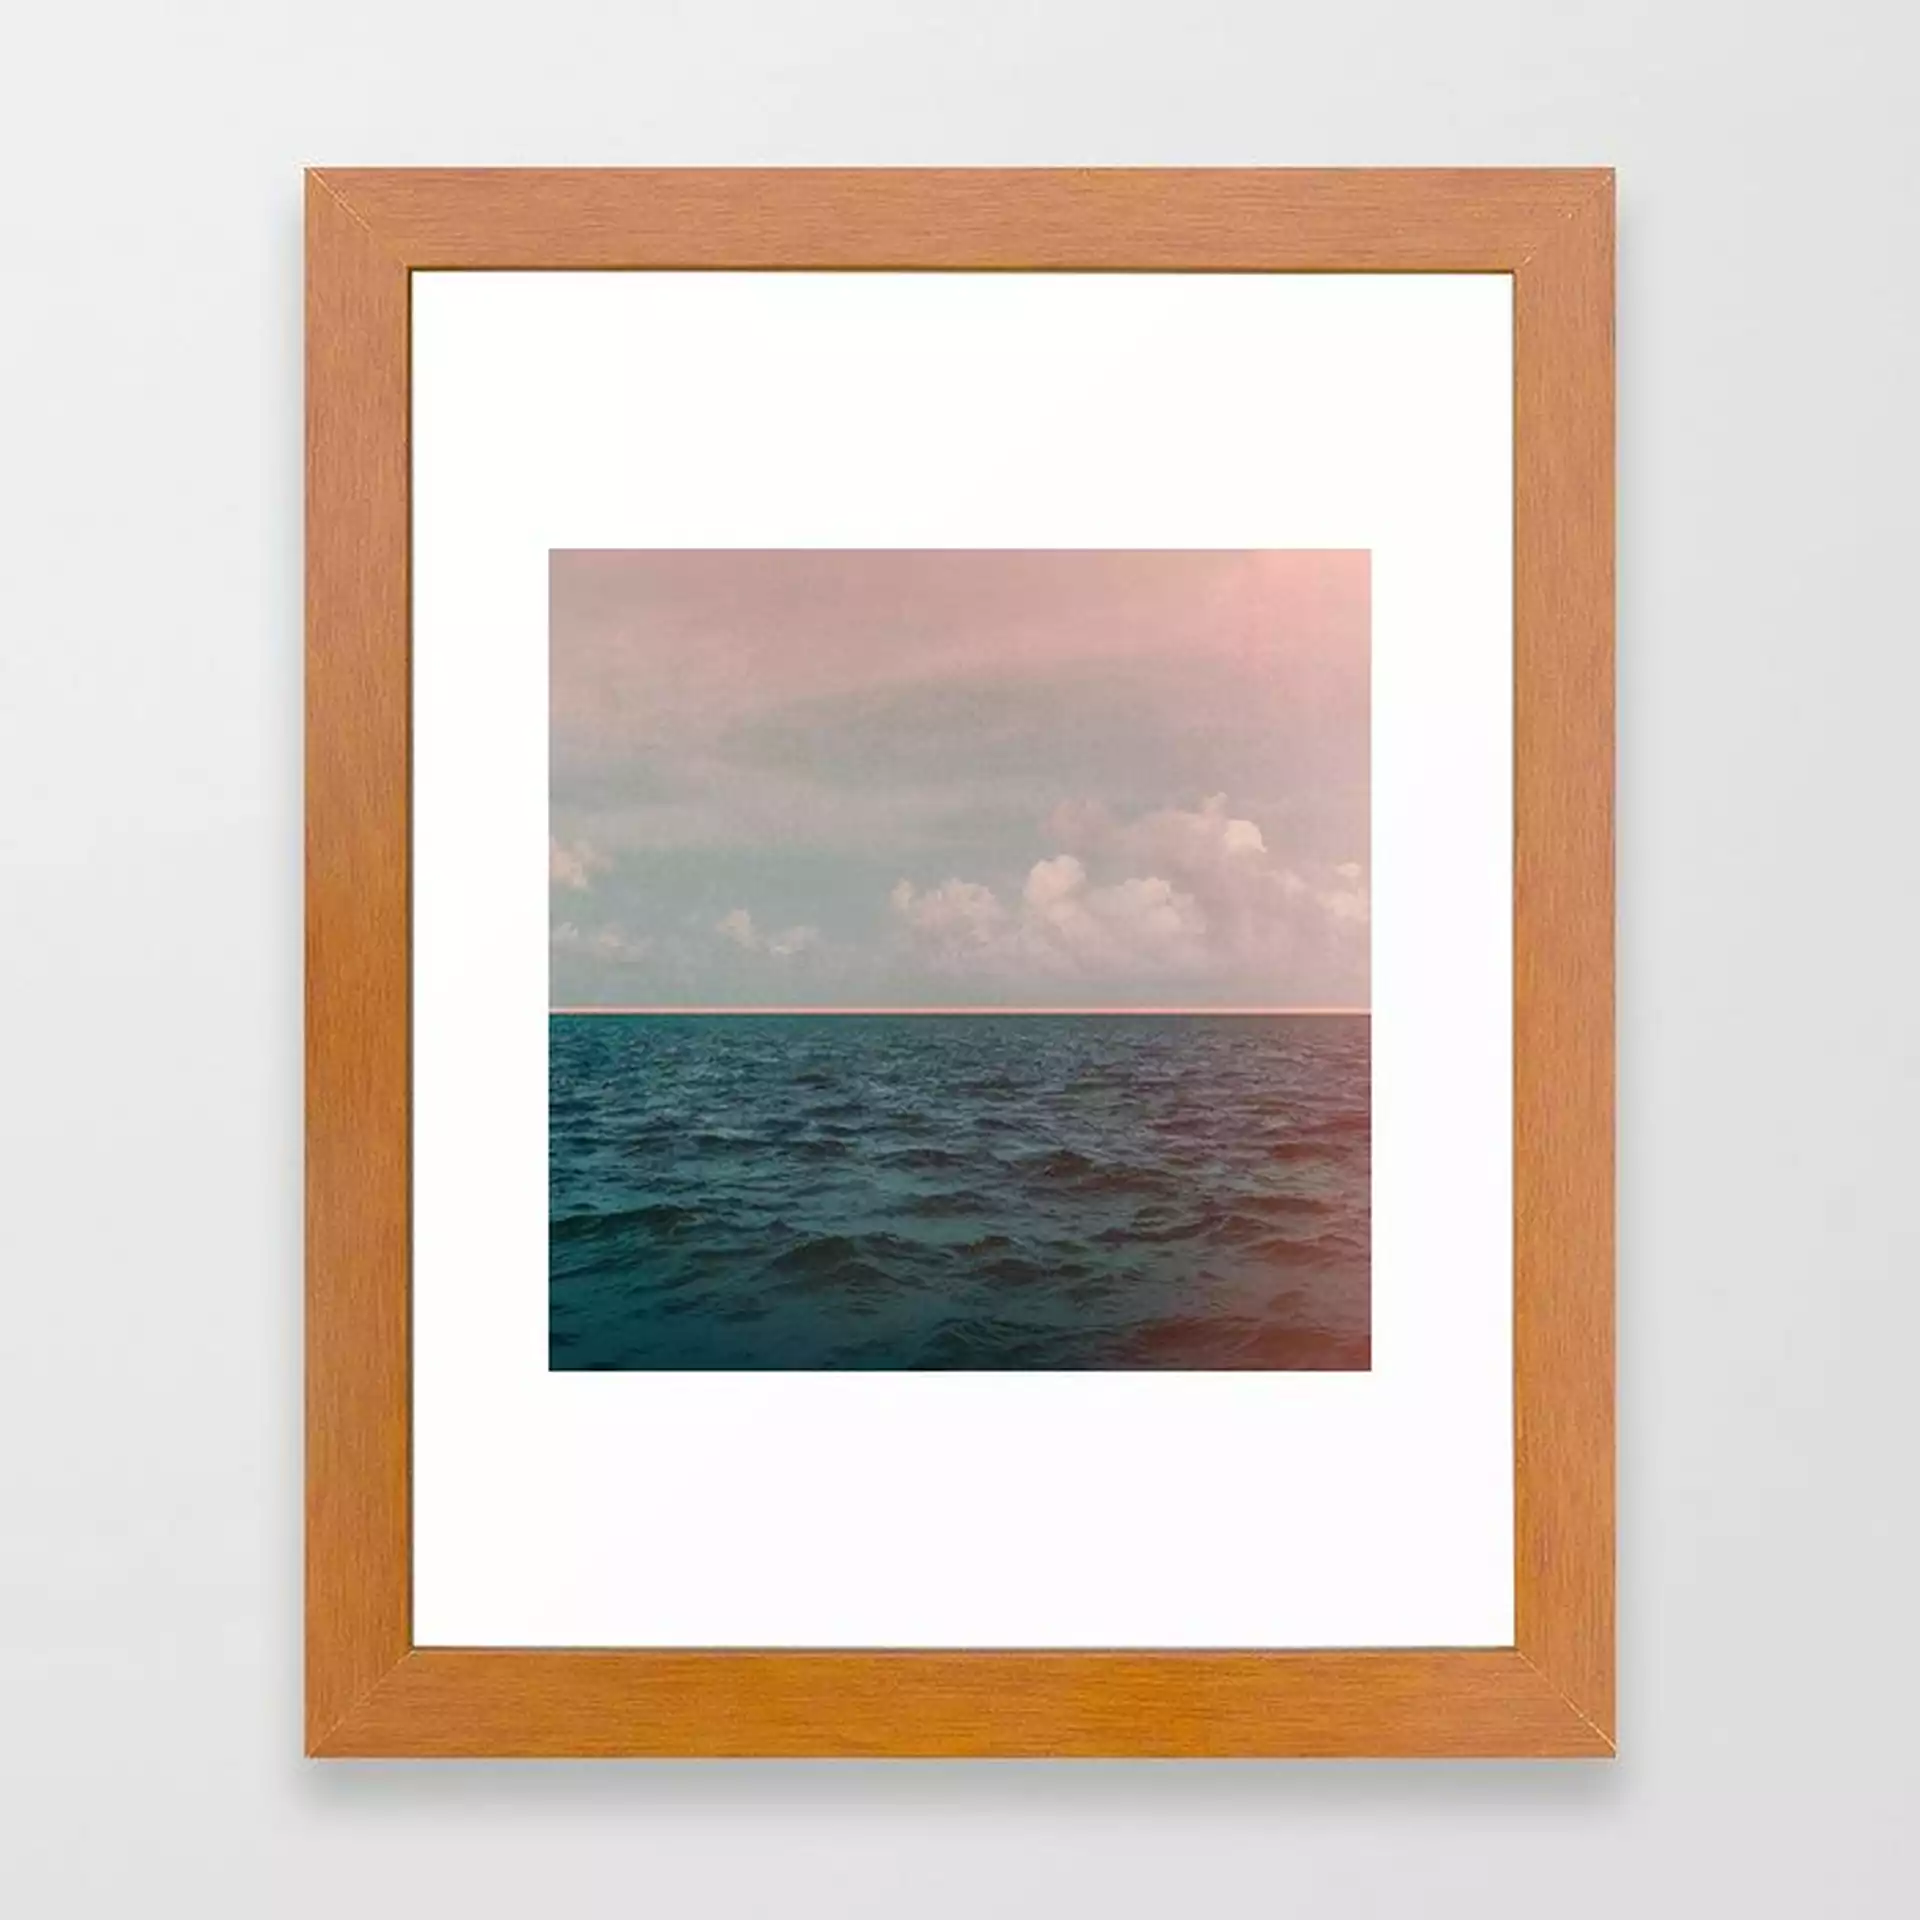 Turquoise Ocean Peach Sunset Framed Art Print by Leah Flores - Conservation Pecan - X-Small-10x12